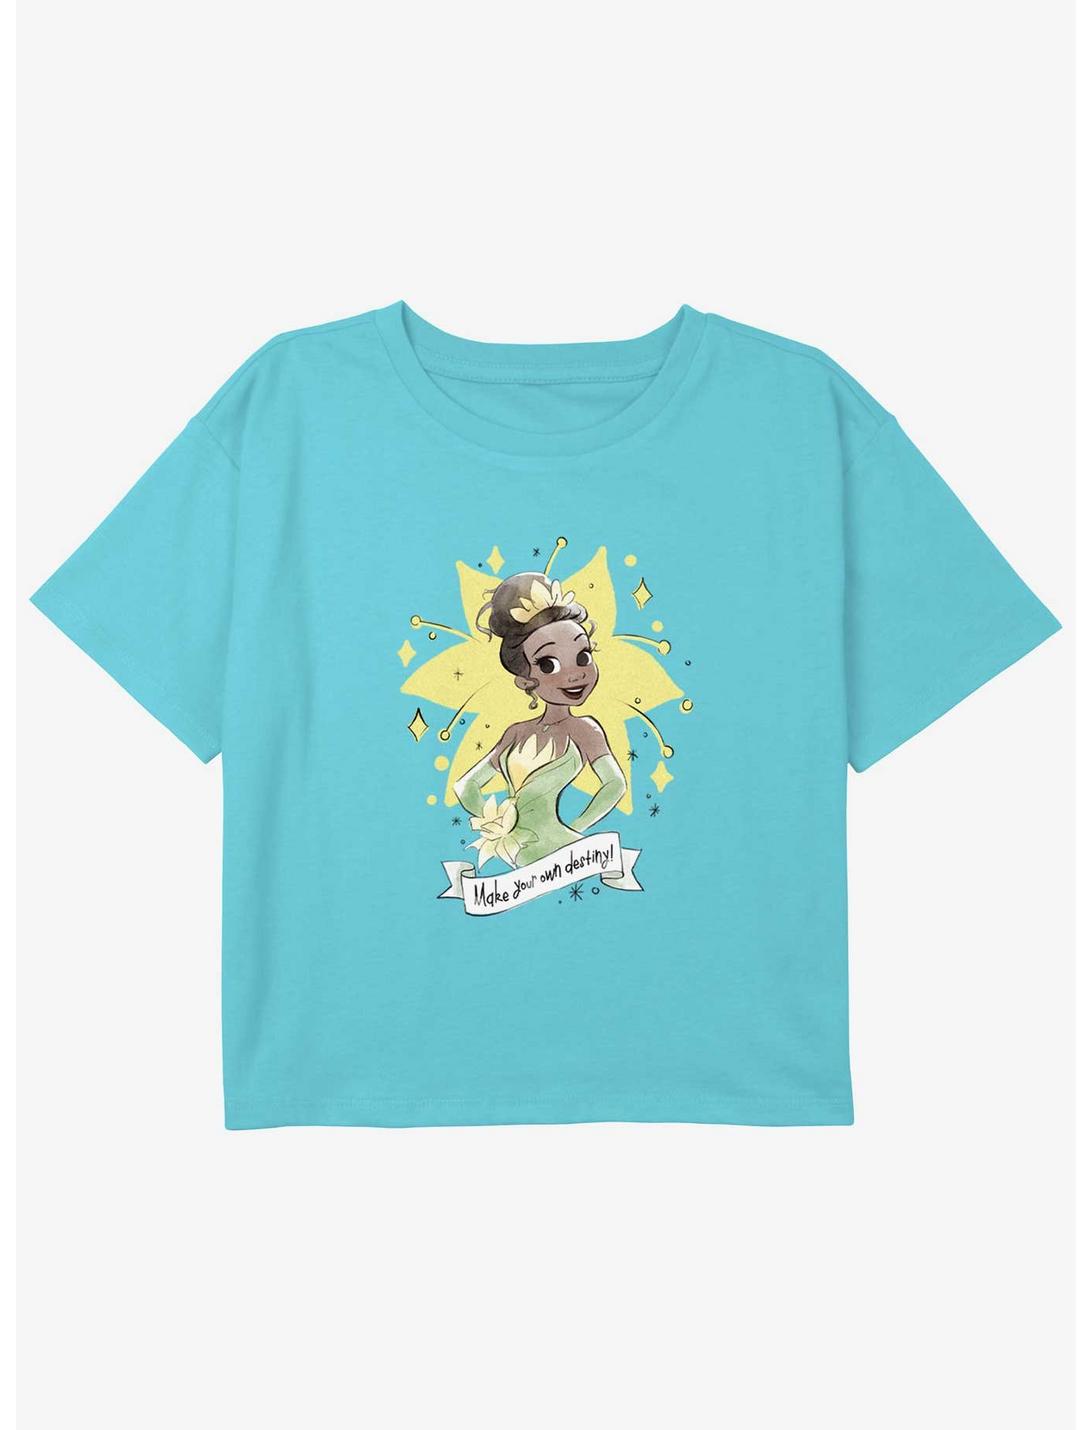 Disney The Princess and the Frog Make Your Own Destiny Girls Youth Crop T-Shirt, BLUE, hi-res